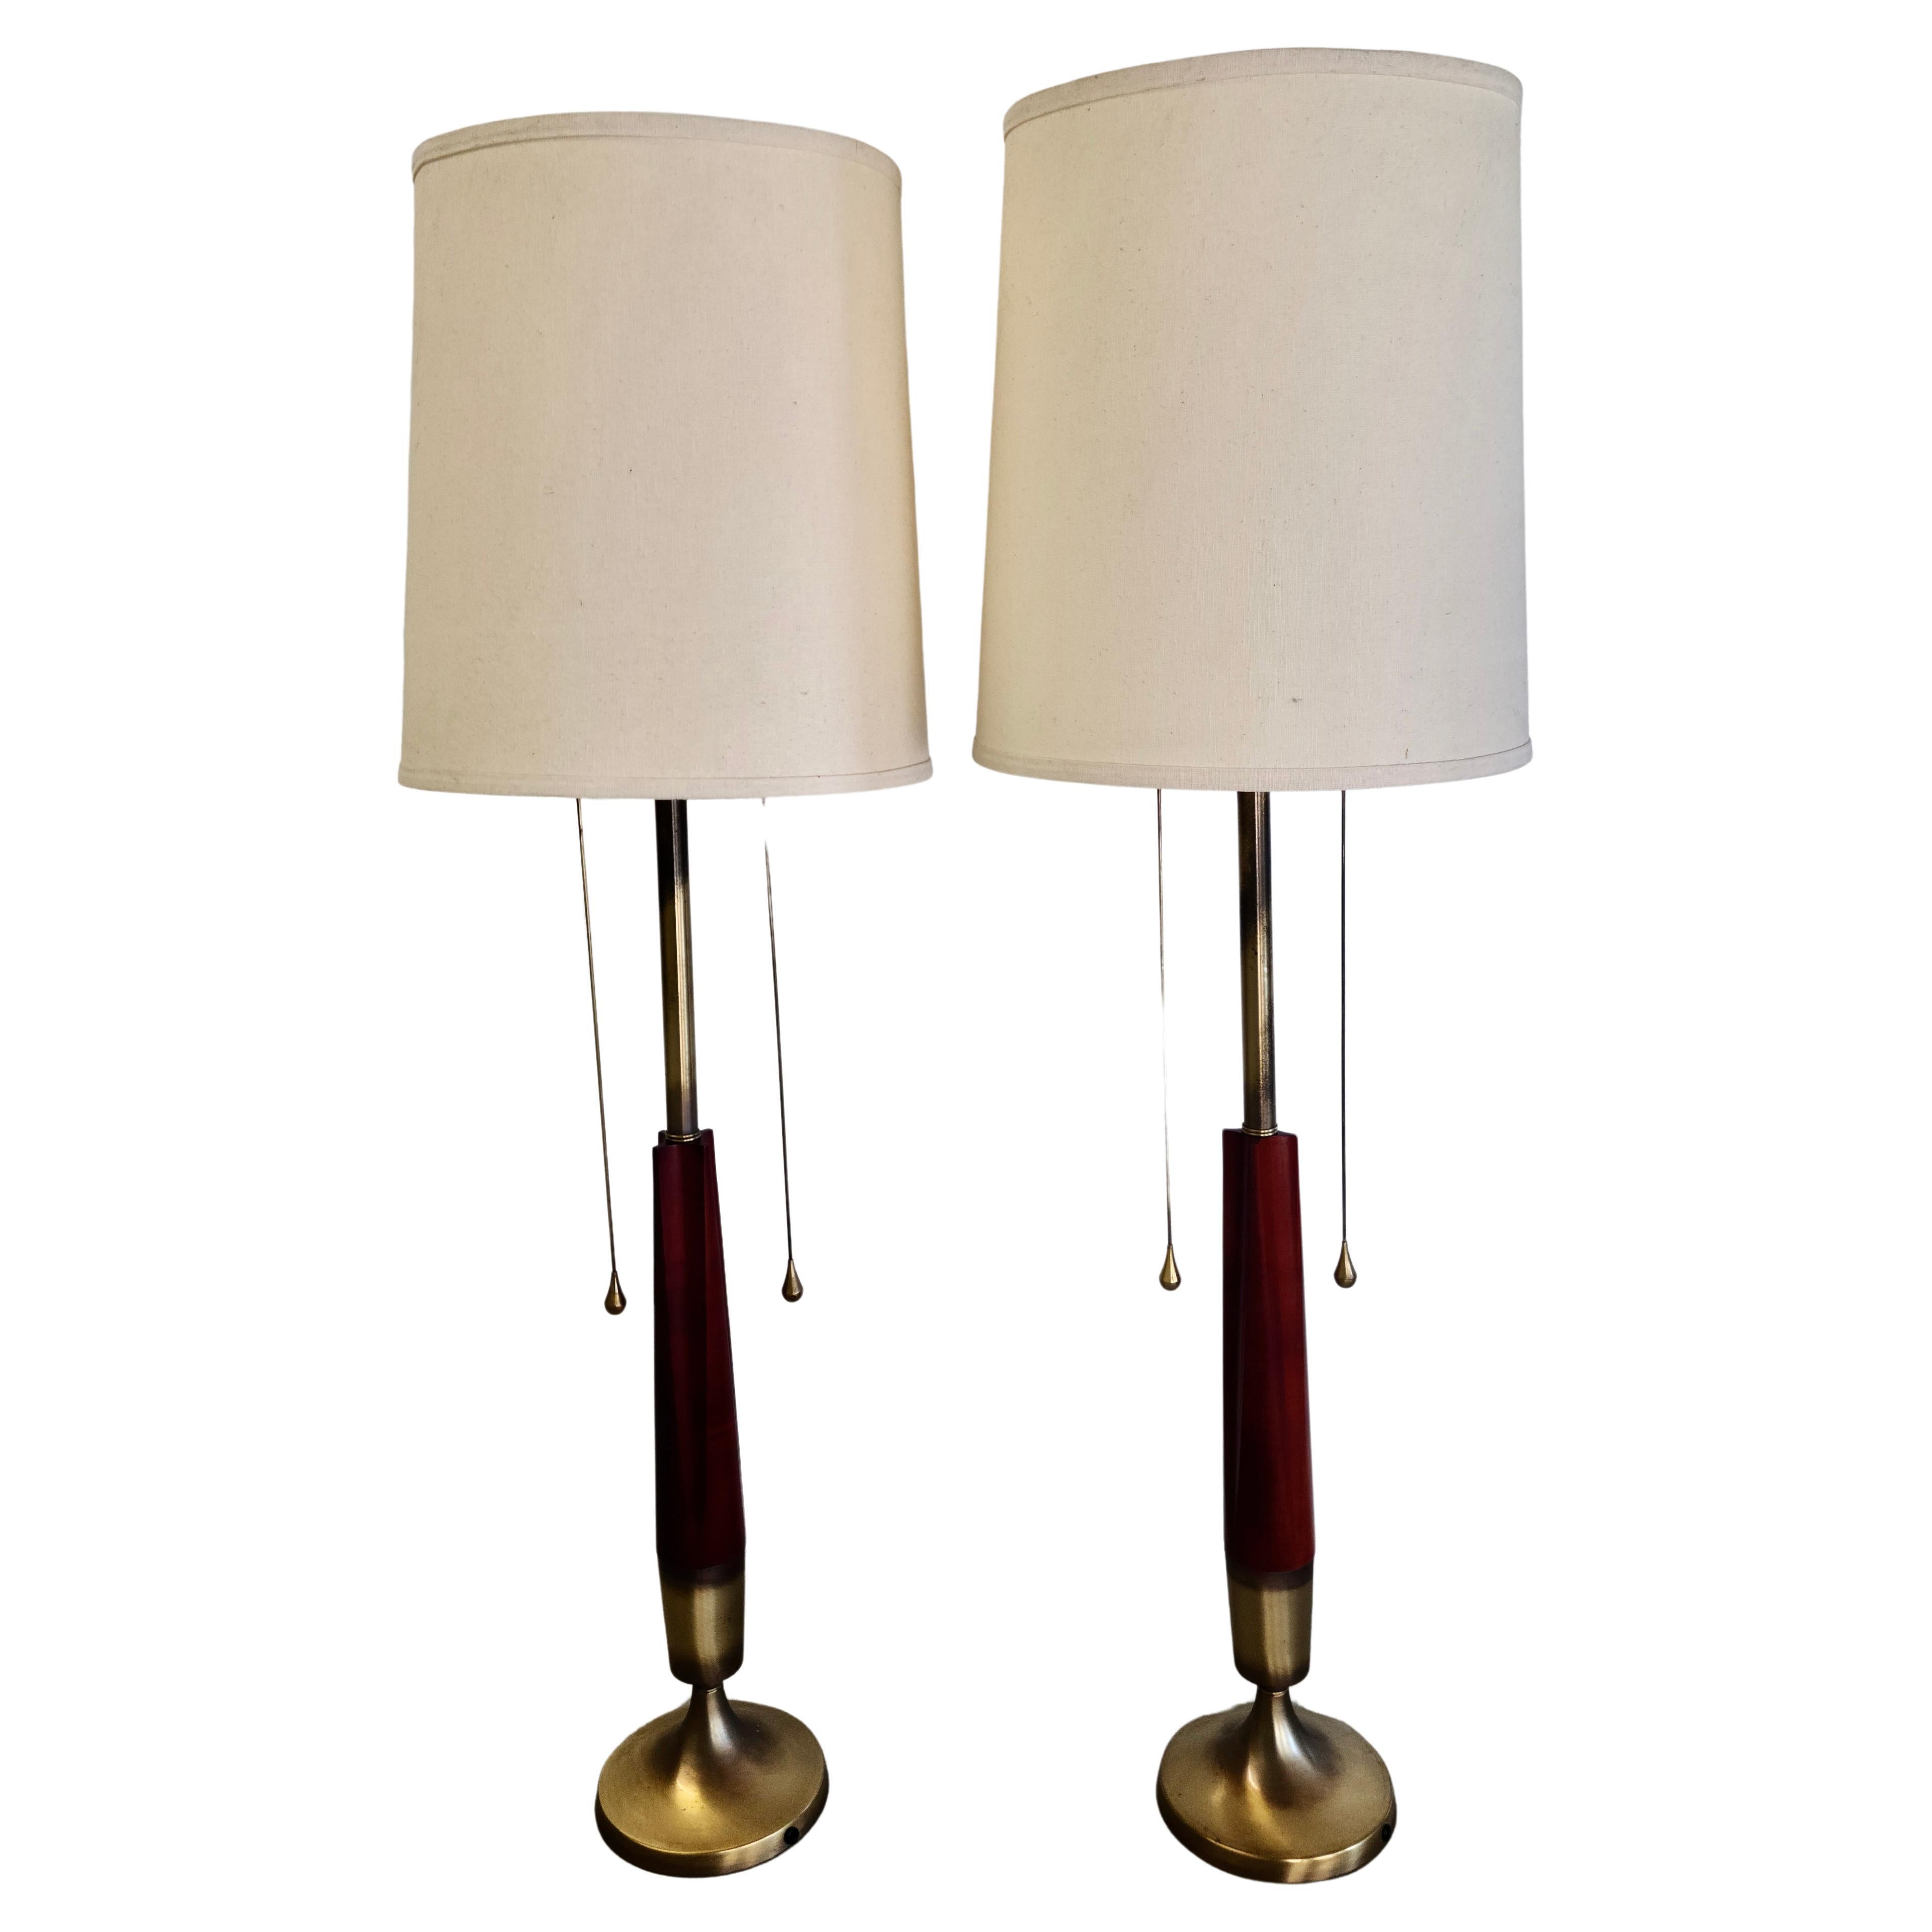 Please feel free to reach out for efficient shipping to your location.

Pair Tall Table Lamps by Westwood Lamp Company.
Sharp mid-century modern design.
Original Antique Brass Finish.
Wood Obelisks have been refinished.
Super long weighted pull